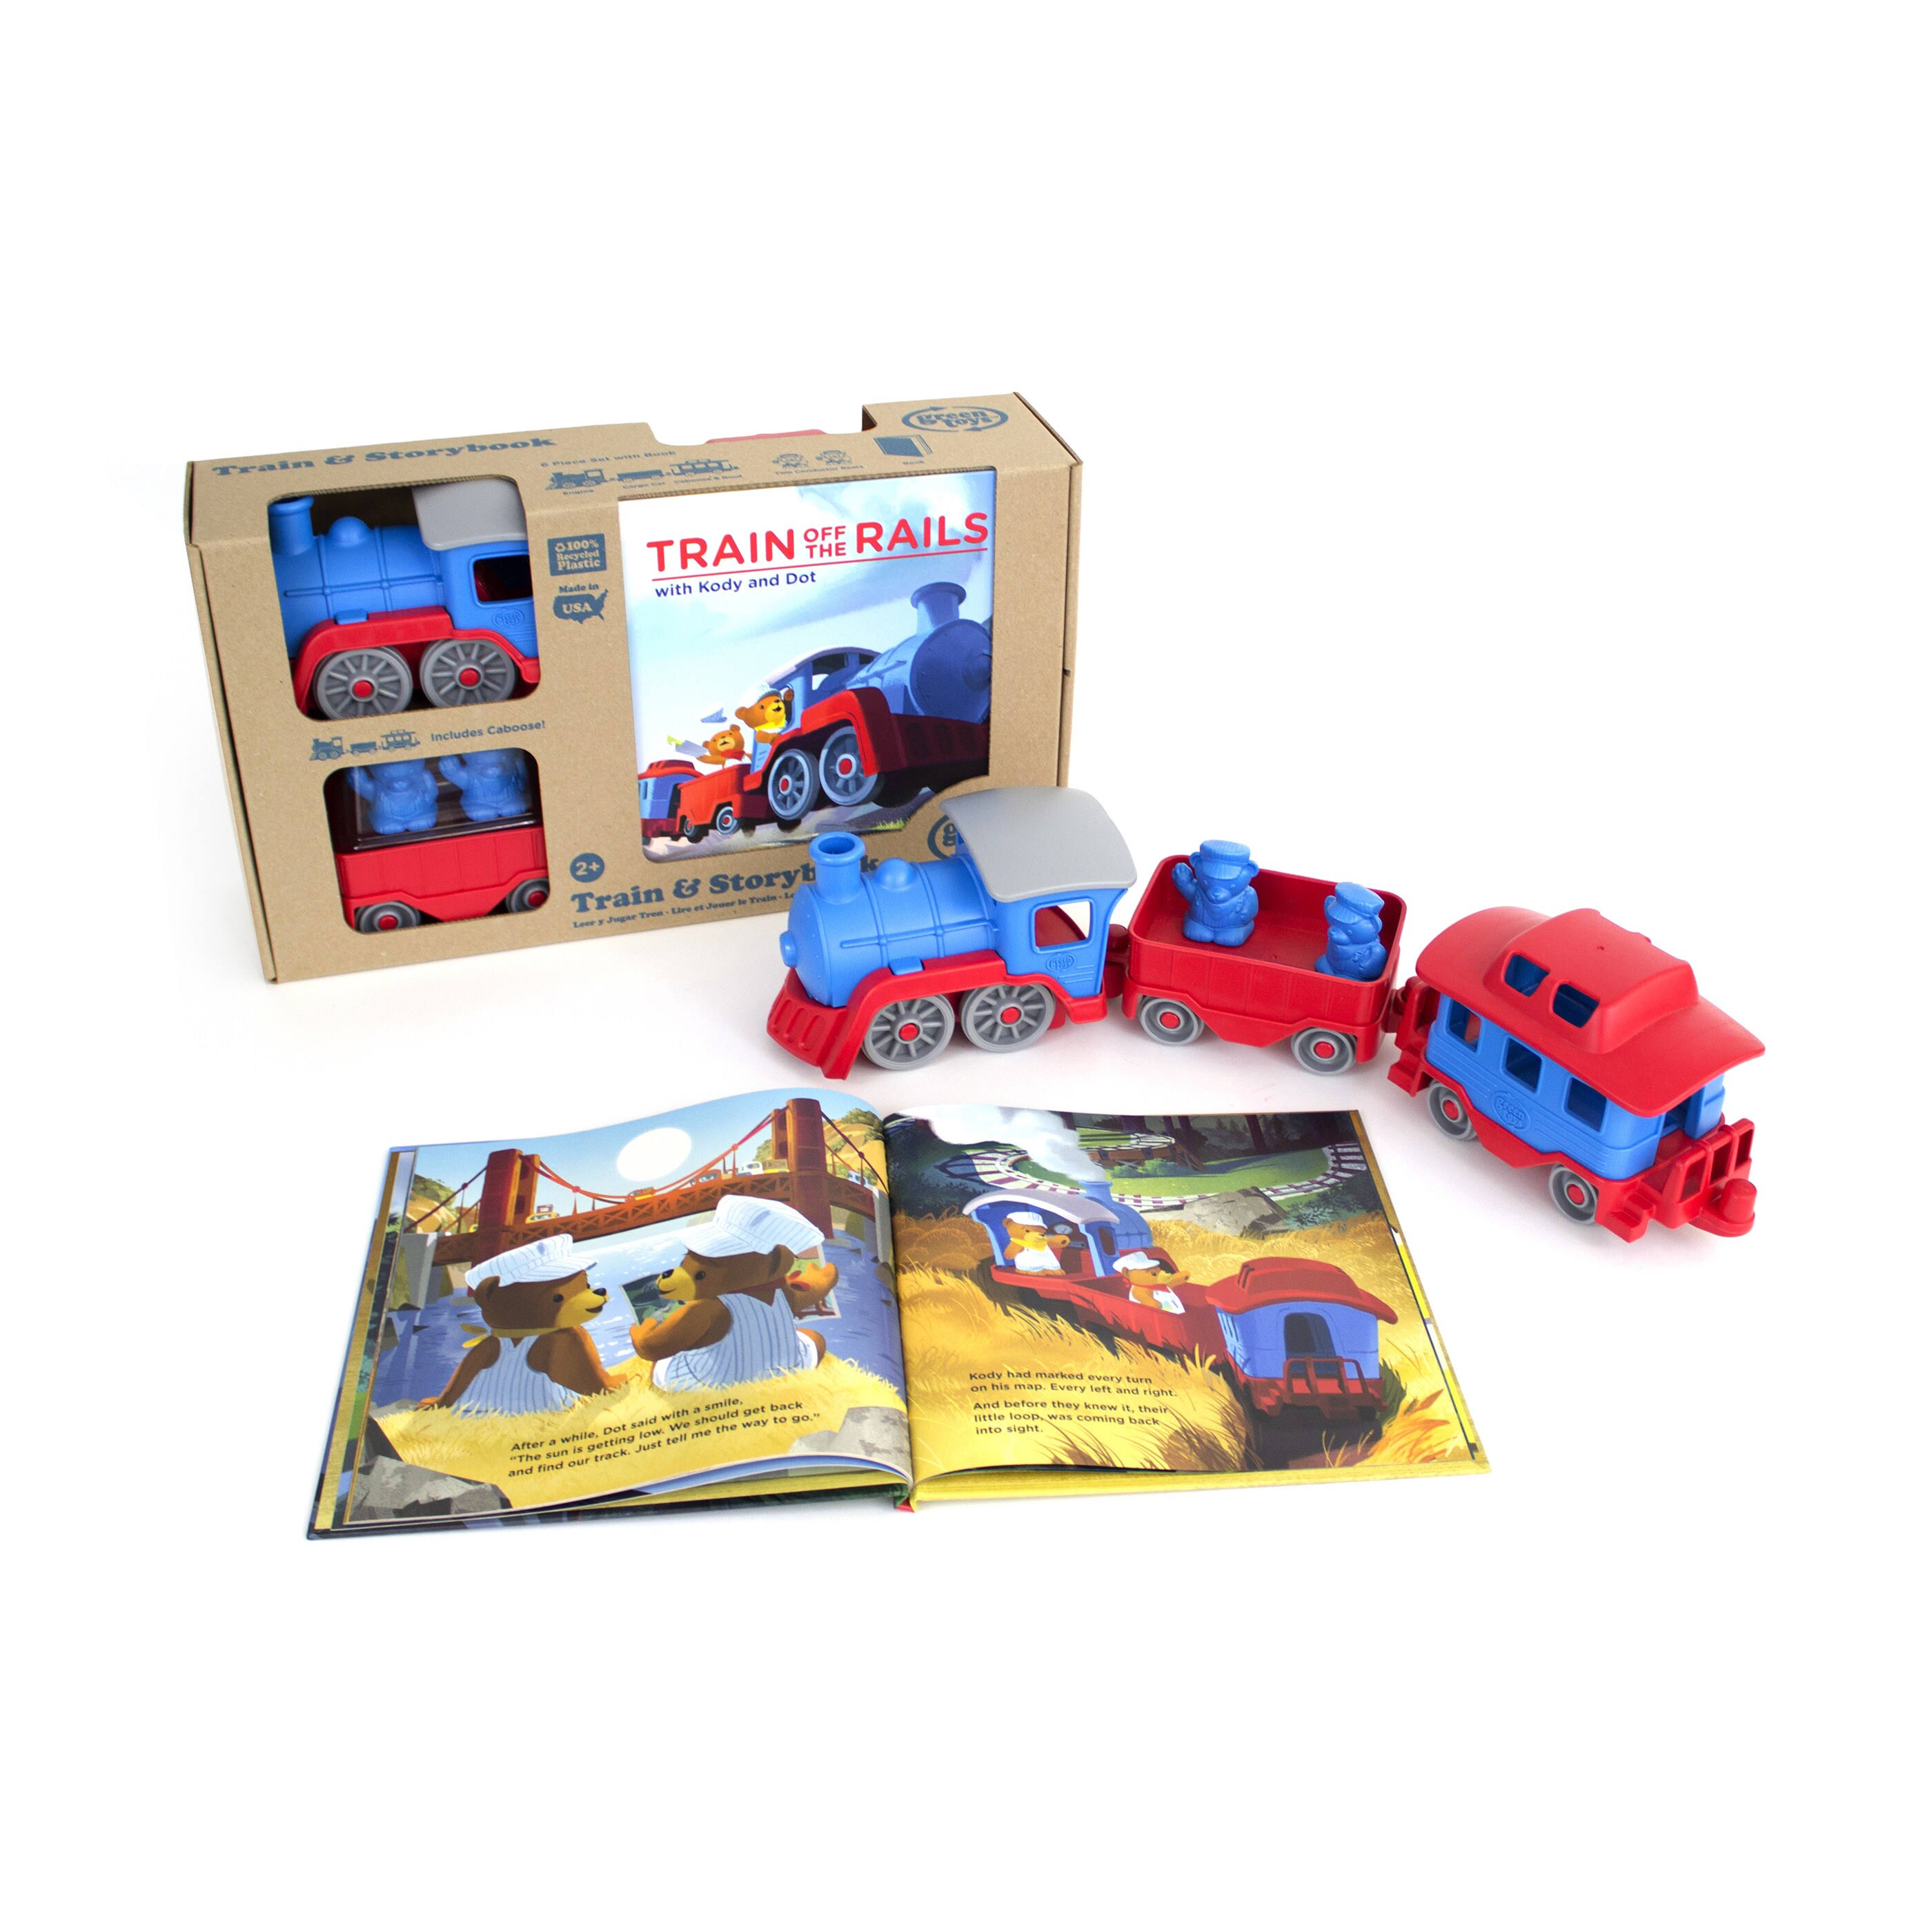 Green Toys Storybook Gift Set - Includes Train